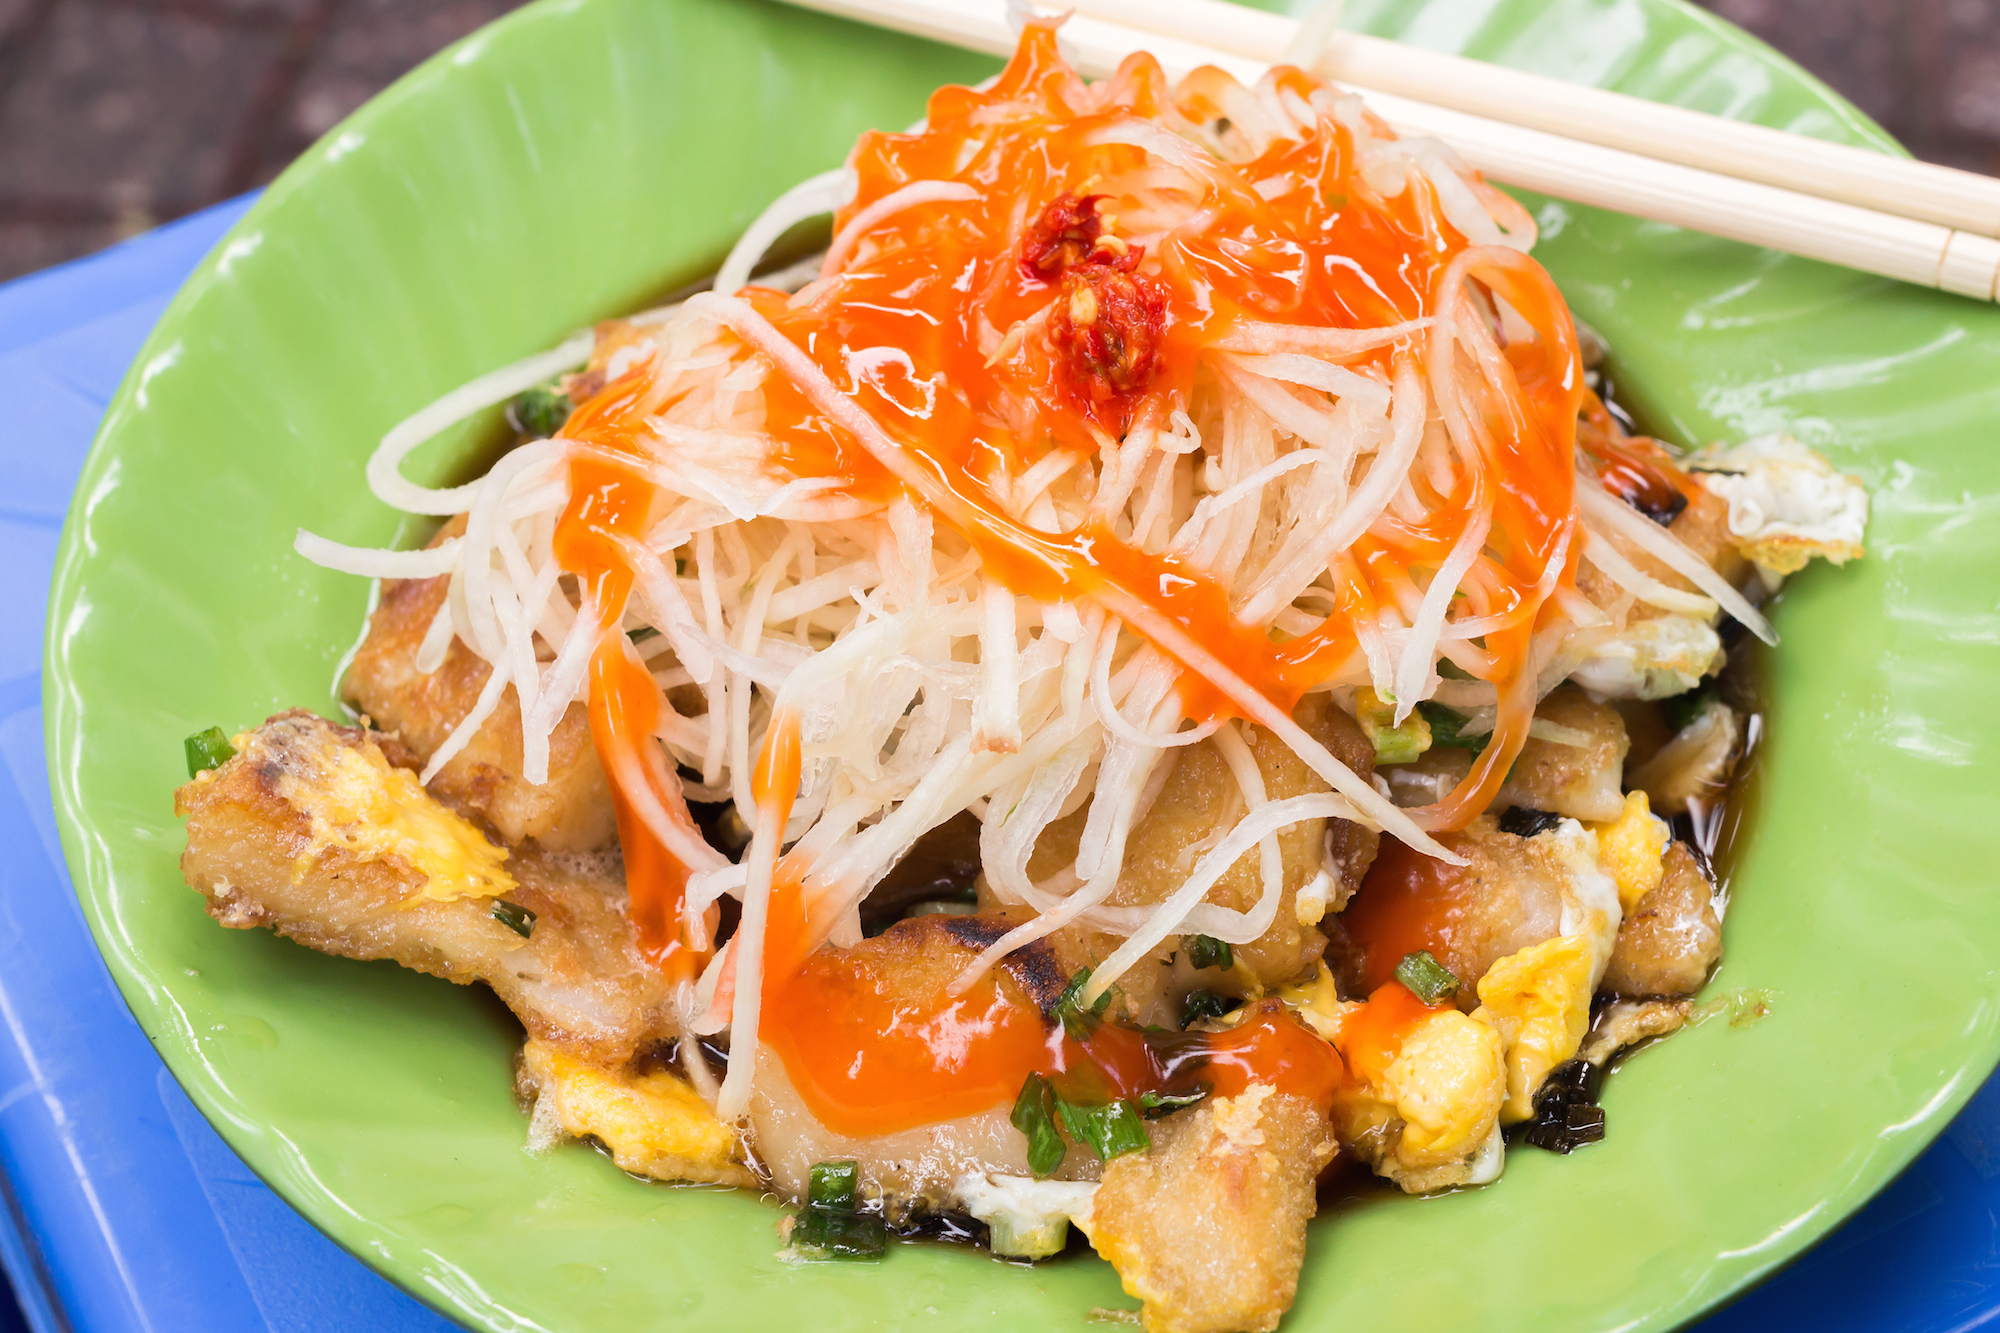 Vietnamese food: 40 delicious dishes to try in Vietnam | CNN Travel